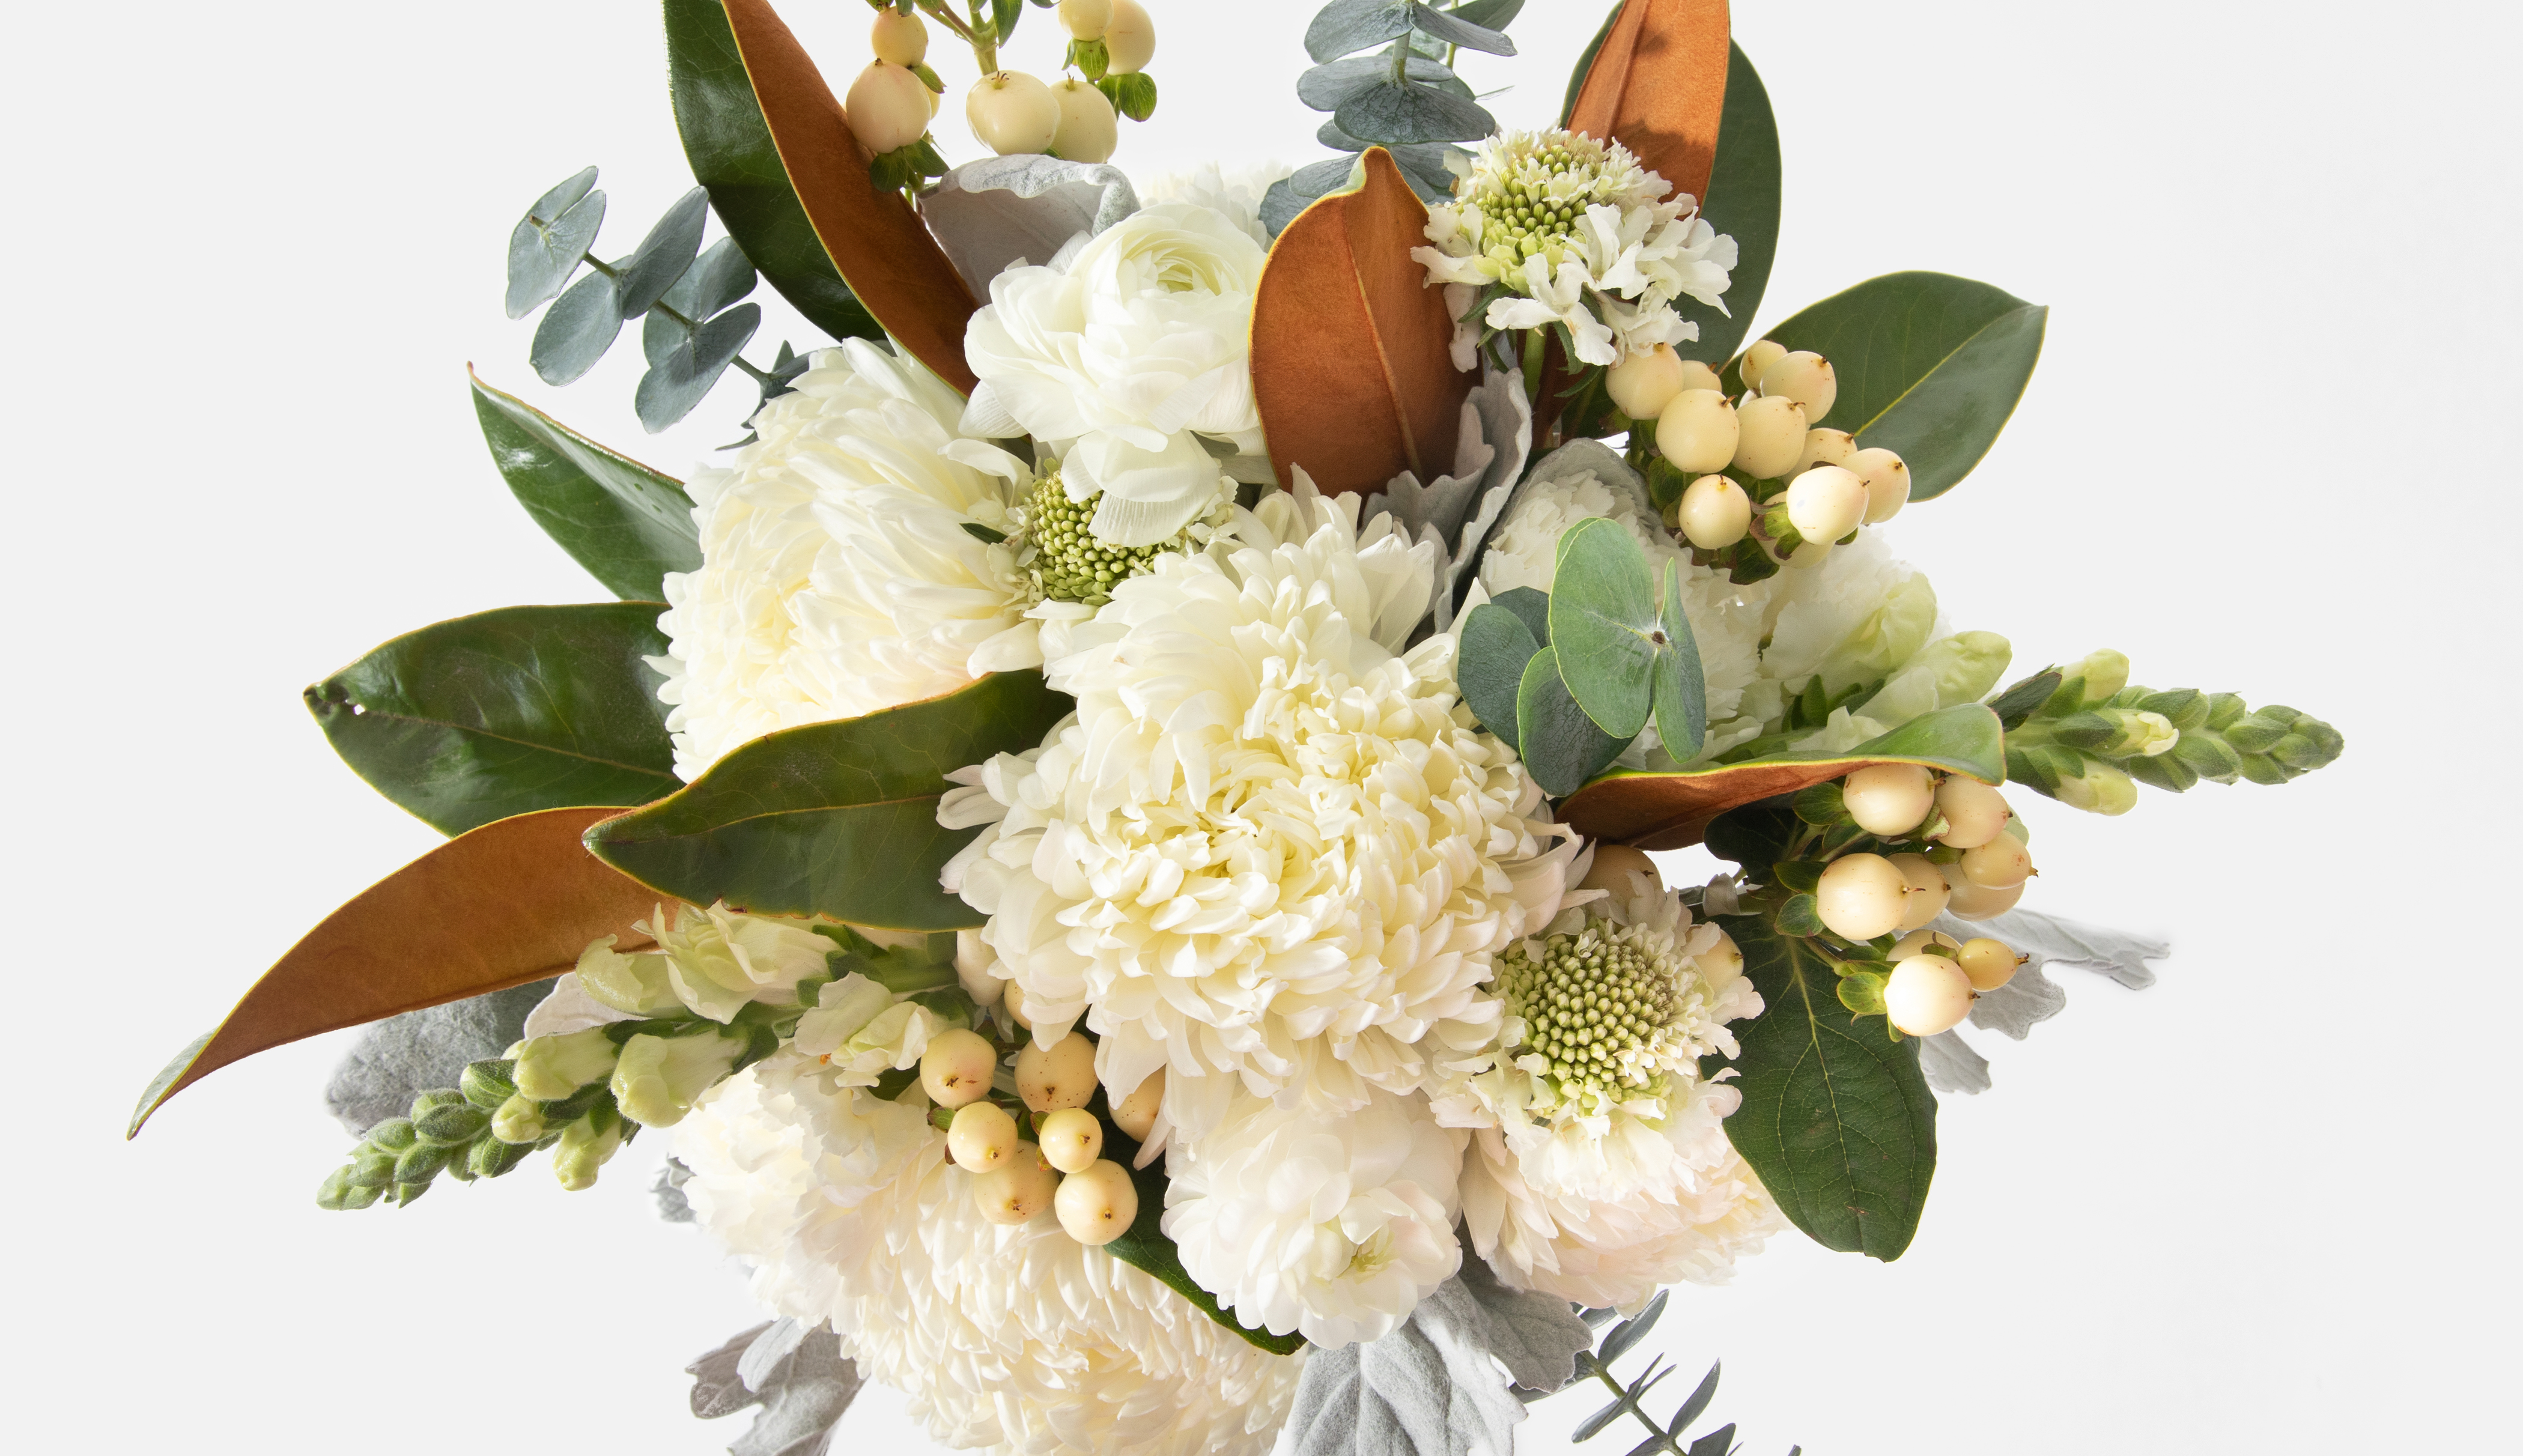 Close up of a floral bouquet containing magnolia leaves